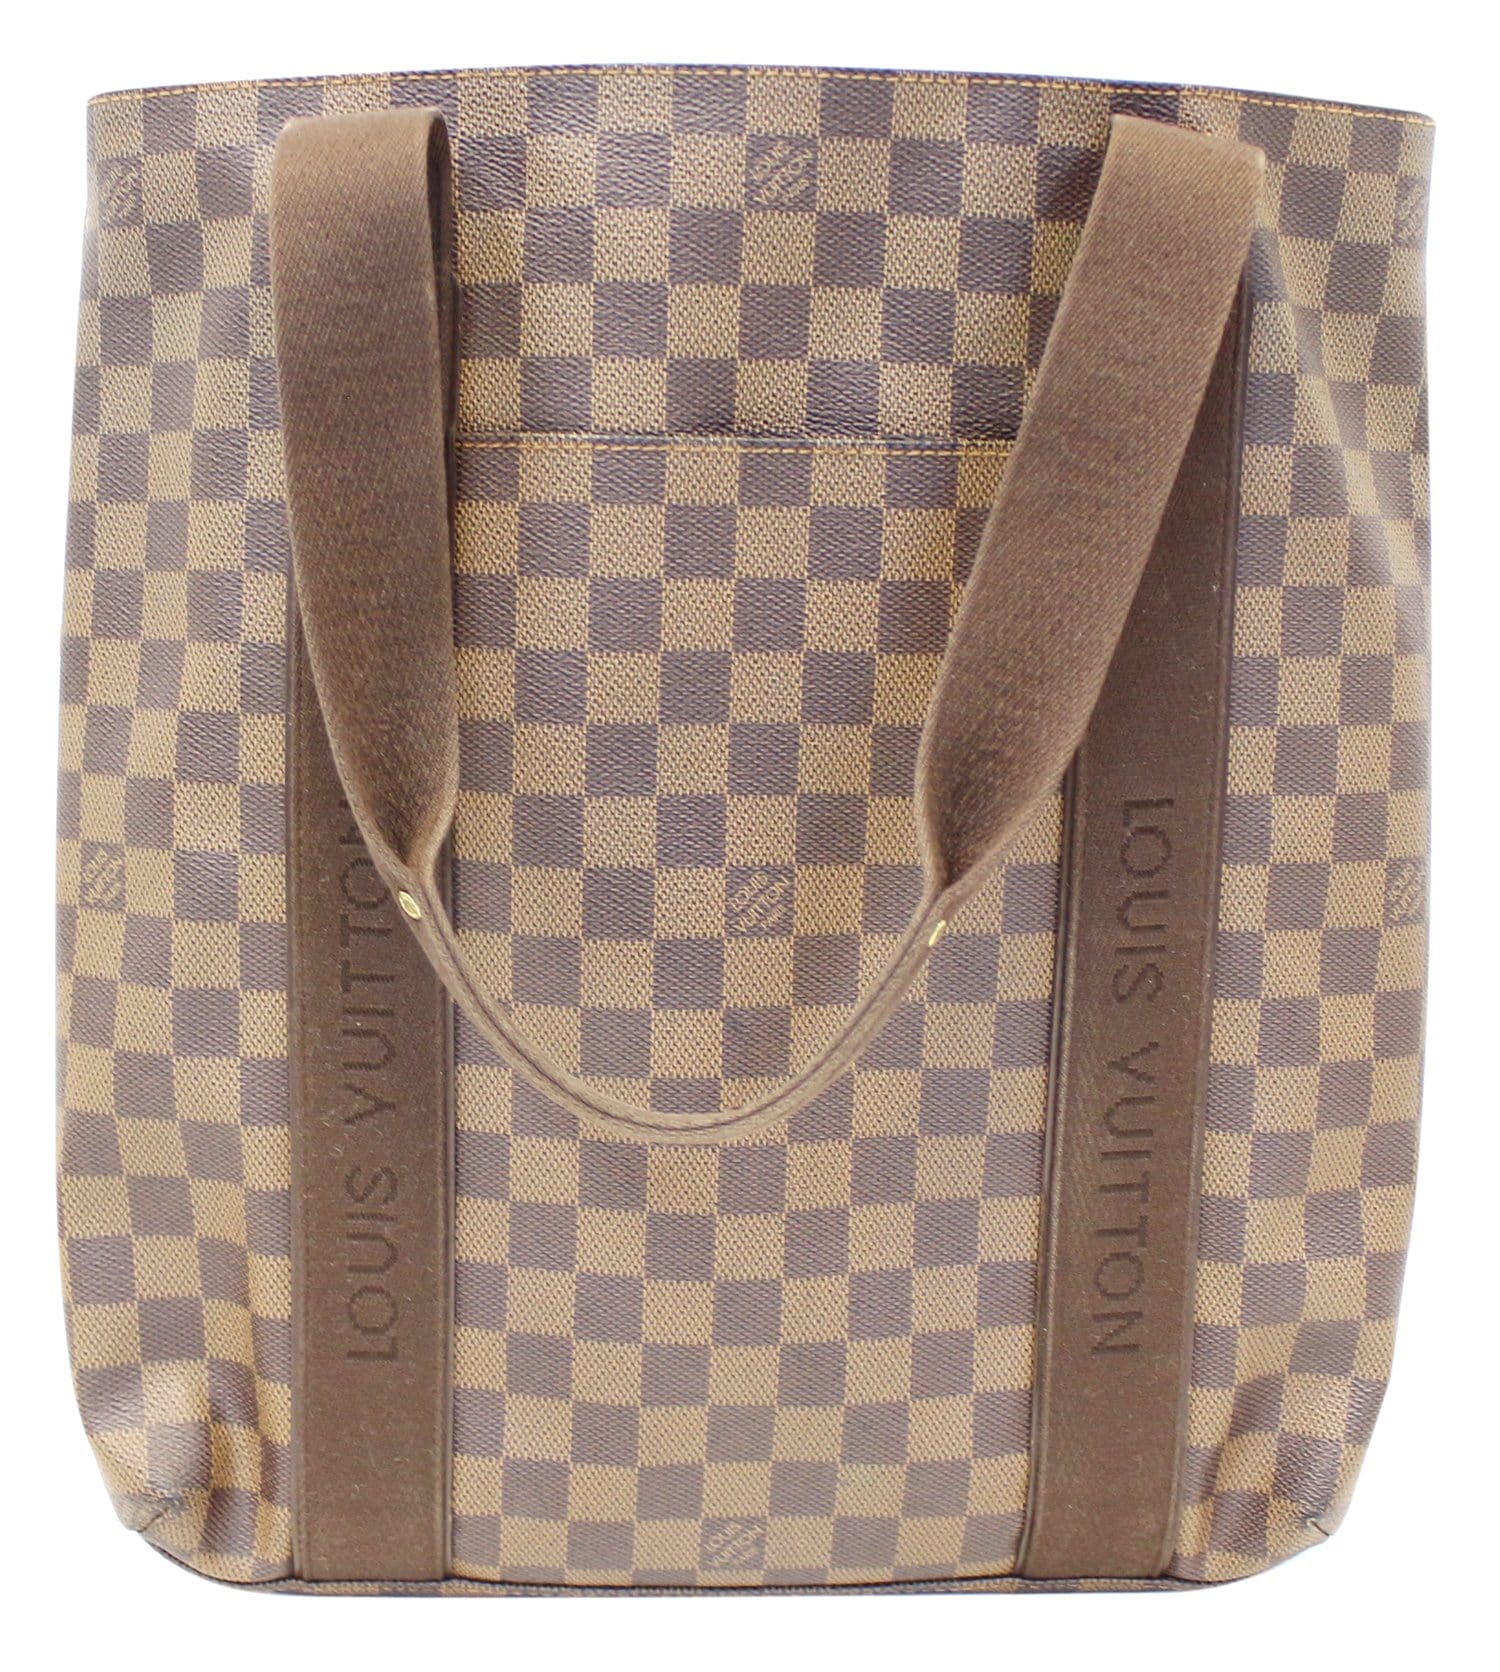 Louis Vuitton 2008 pre-owned Cabas Beaubourg Tote Bag - Farfetch